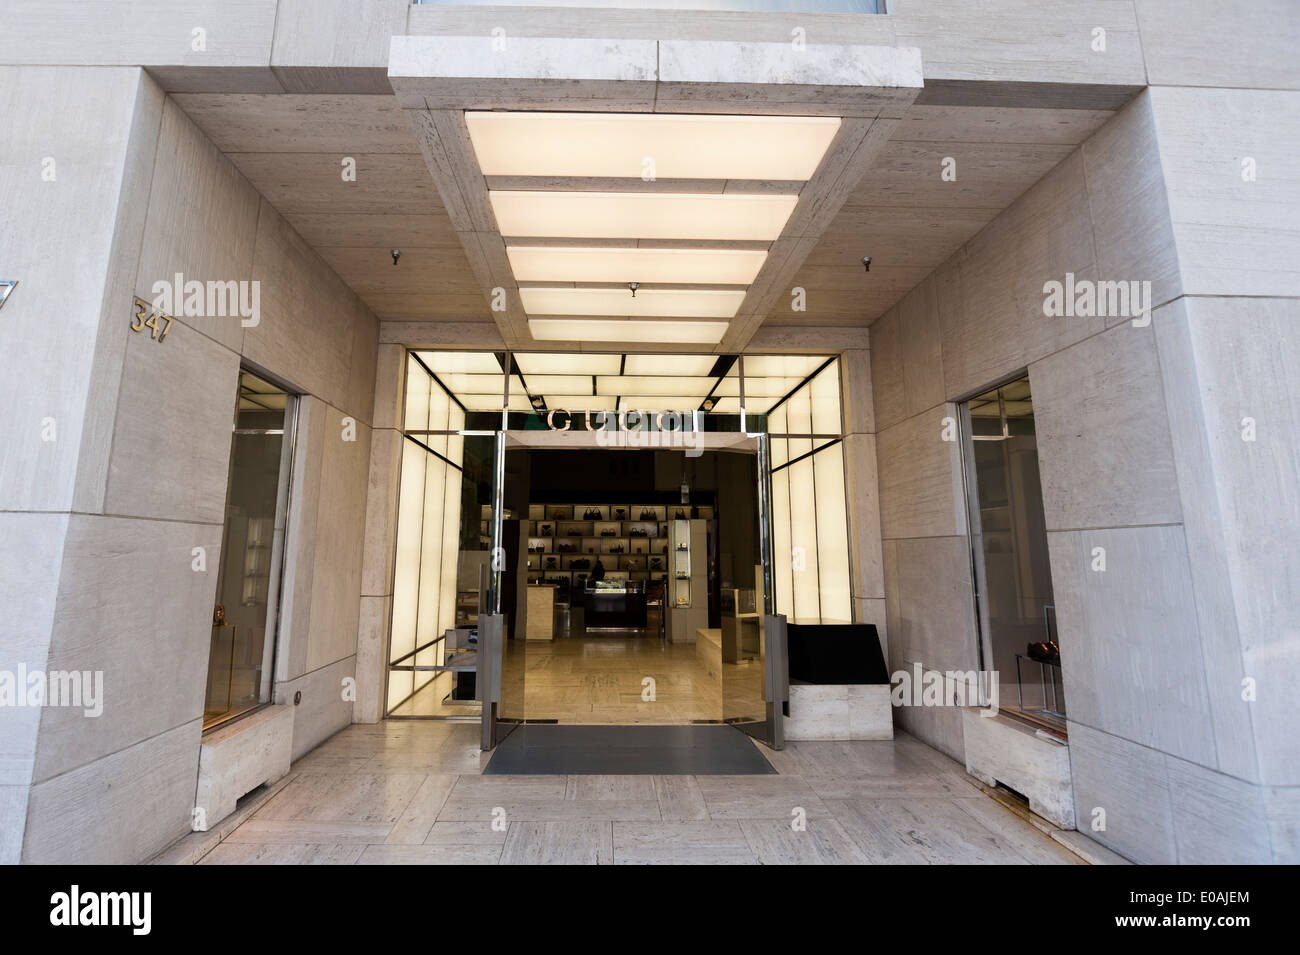 BEVERLY HILLS, CA/USA - OCTOBER 29, 2019: Entrance to the Gucci store on Rodeo  Drive, the most exclusive shopping area in the USA Stock Photo - Alamy